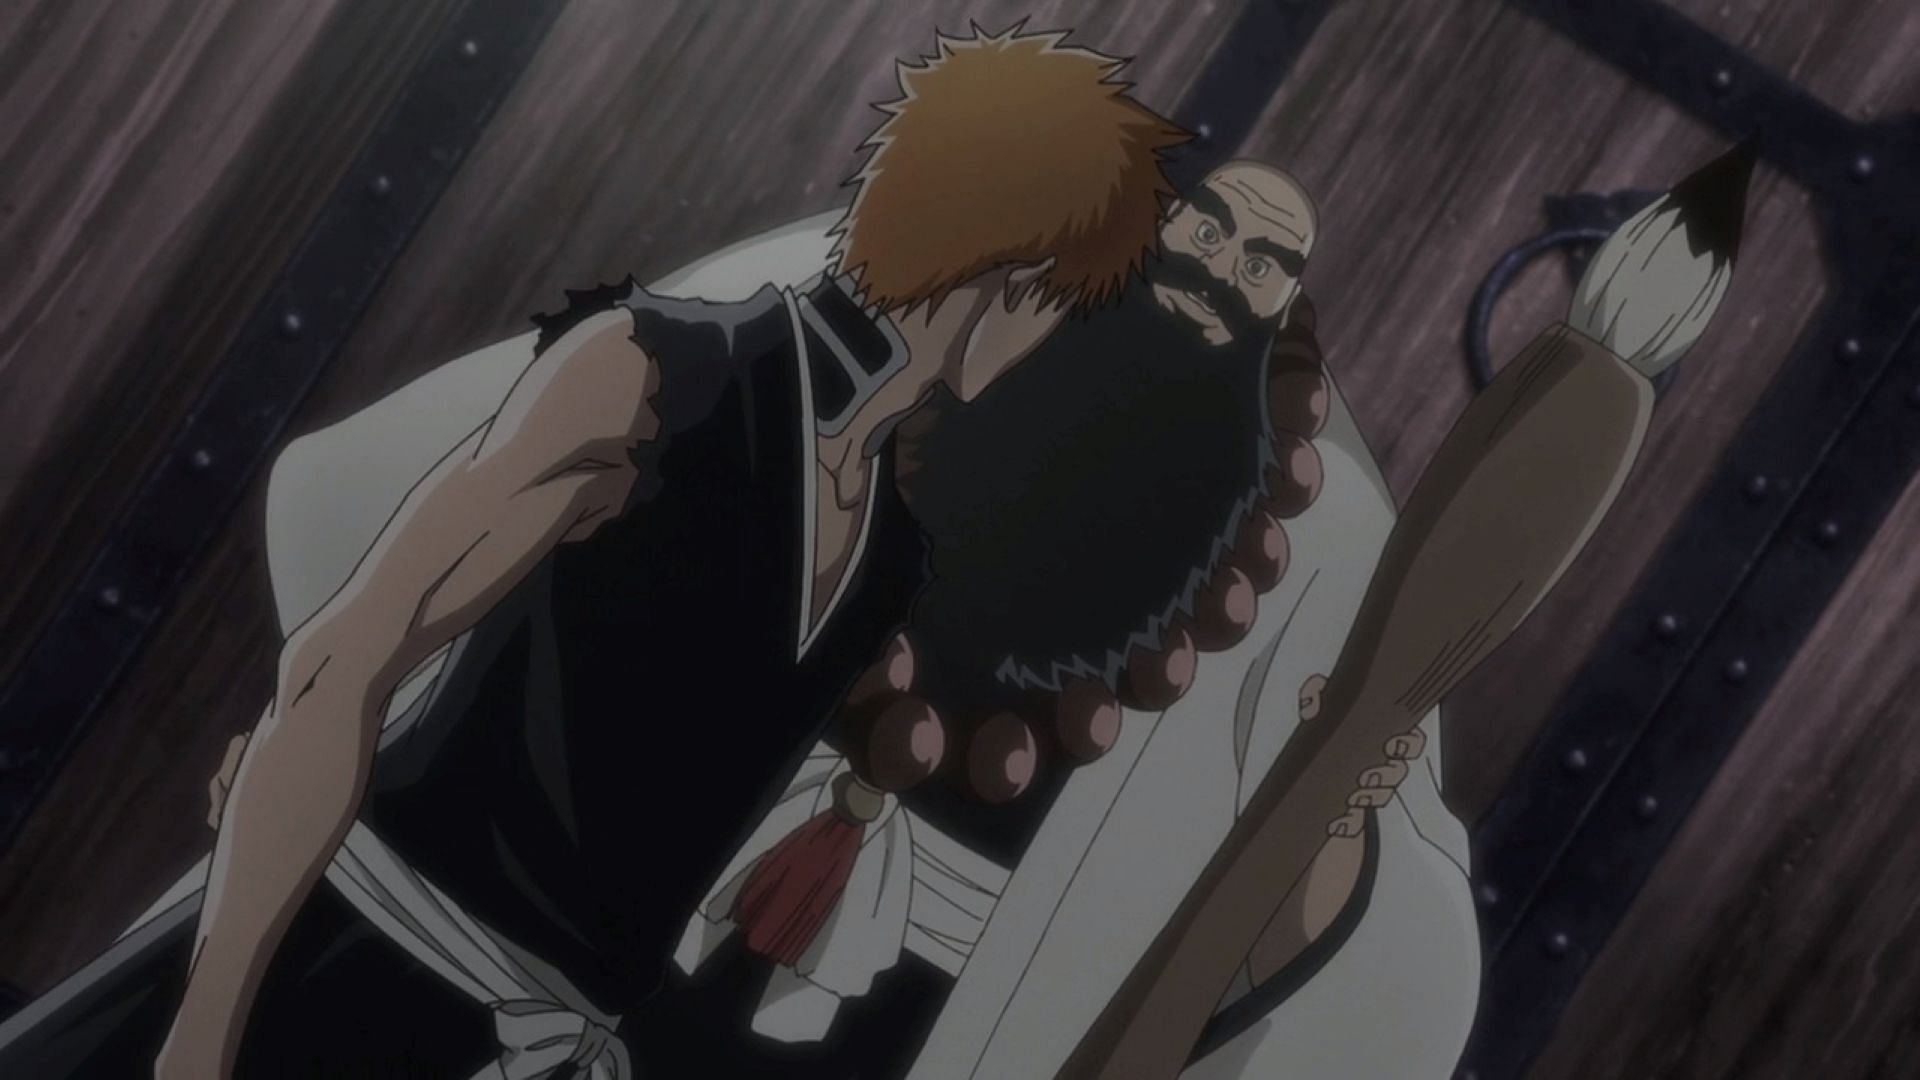 Bleach: TYBW episode 14 - Potential release date and what to expect